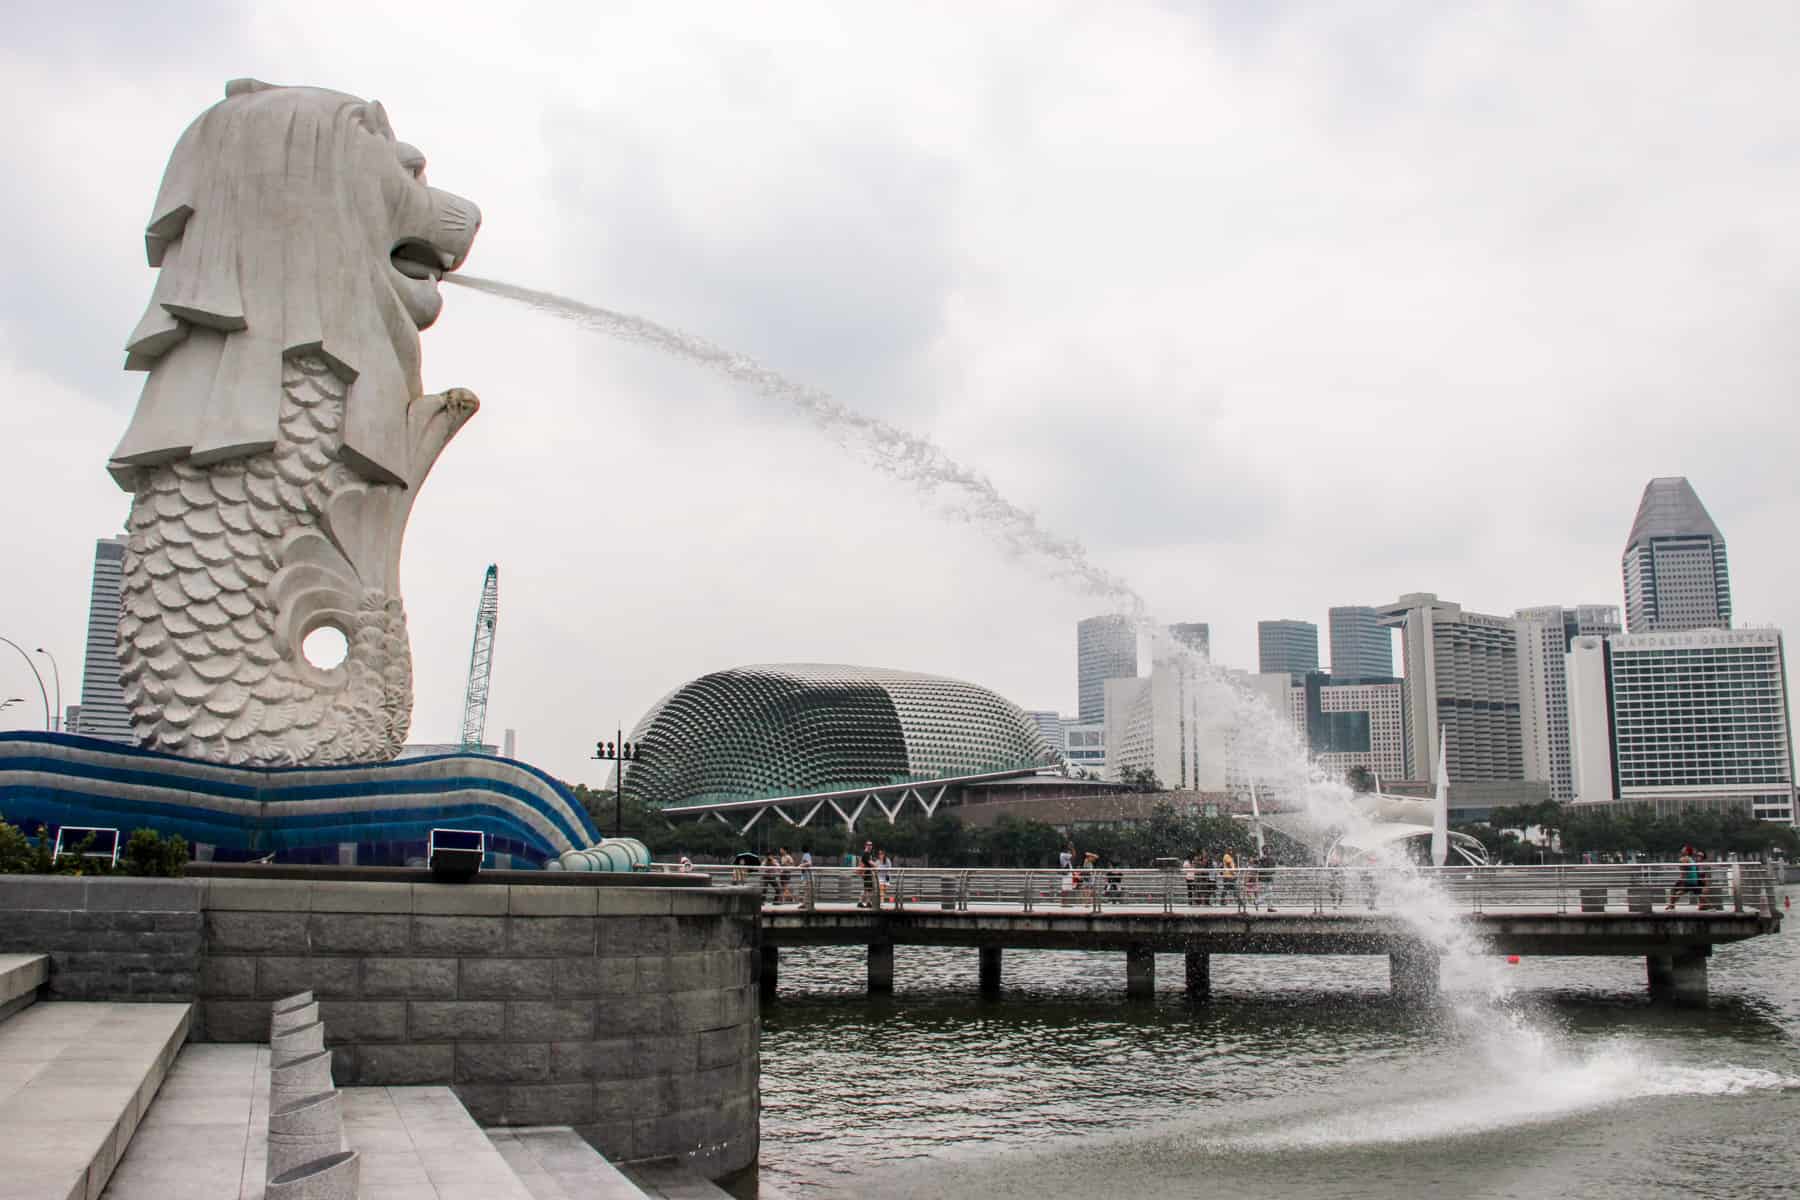 The white Singapore Merlion water statue on the Singapore Riverfront - an icon of the city and a must-see on a Singapore Itinerary